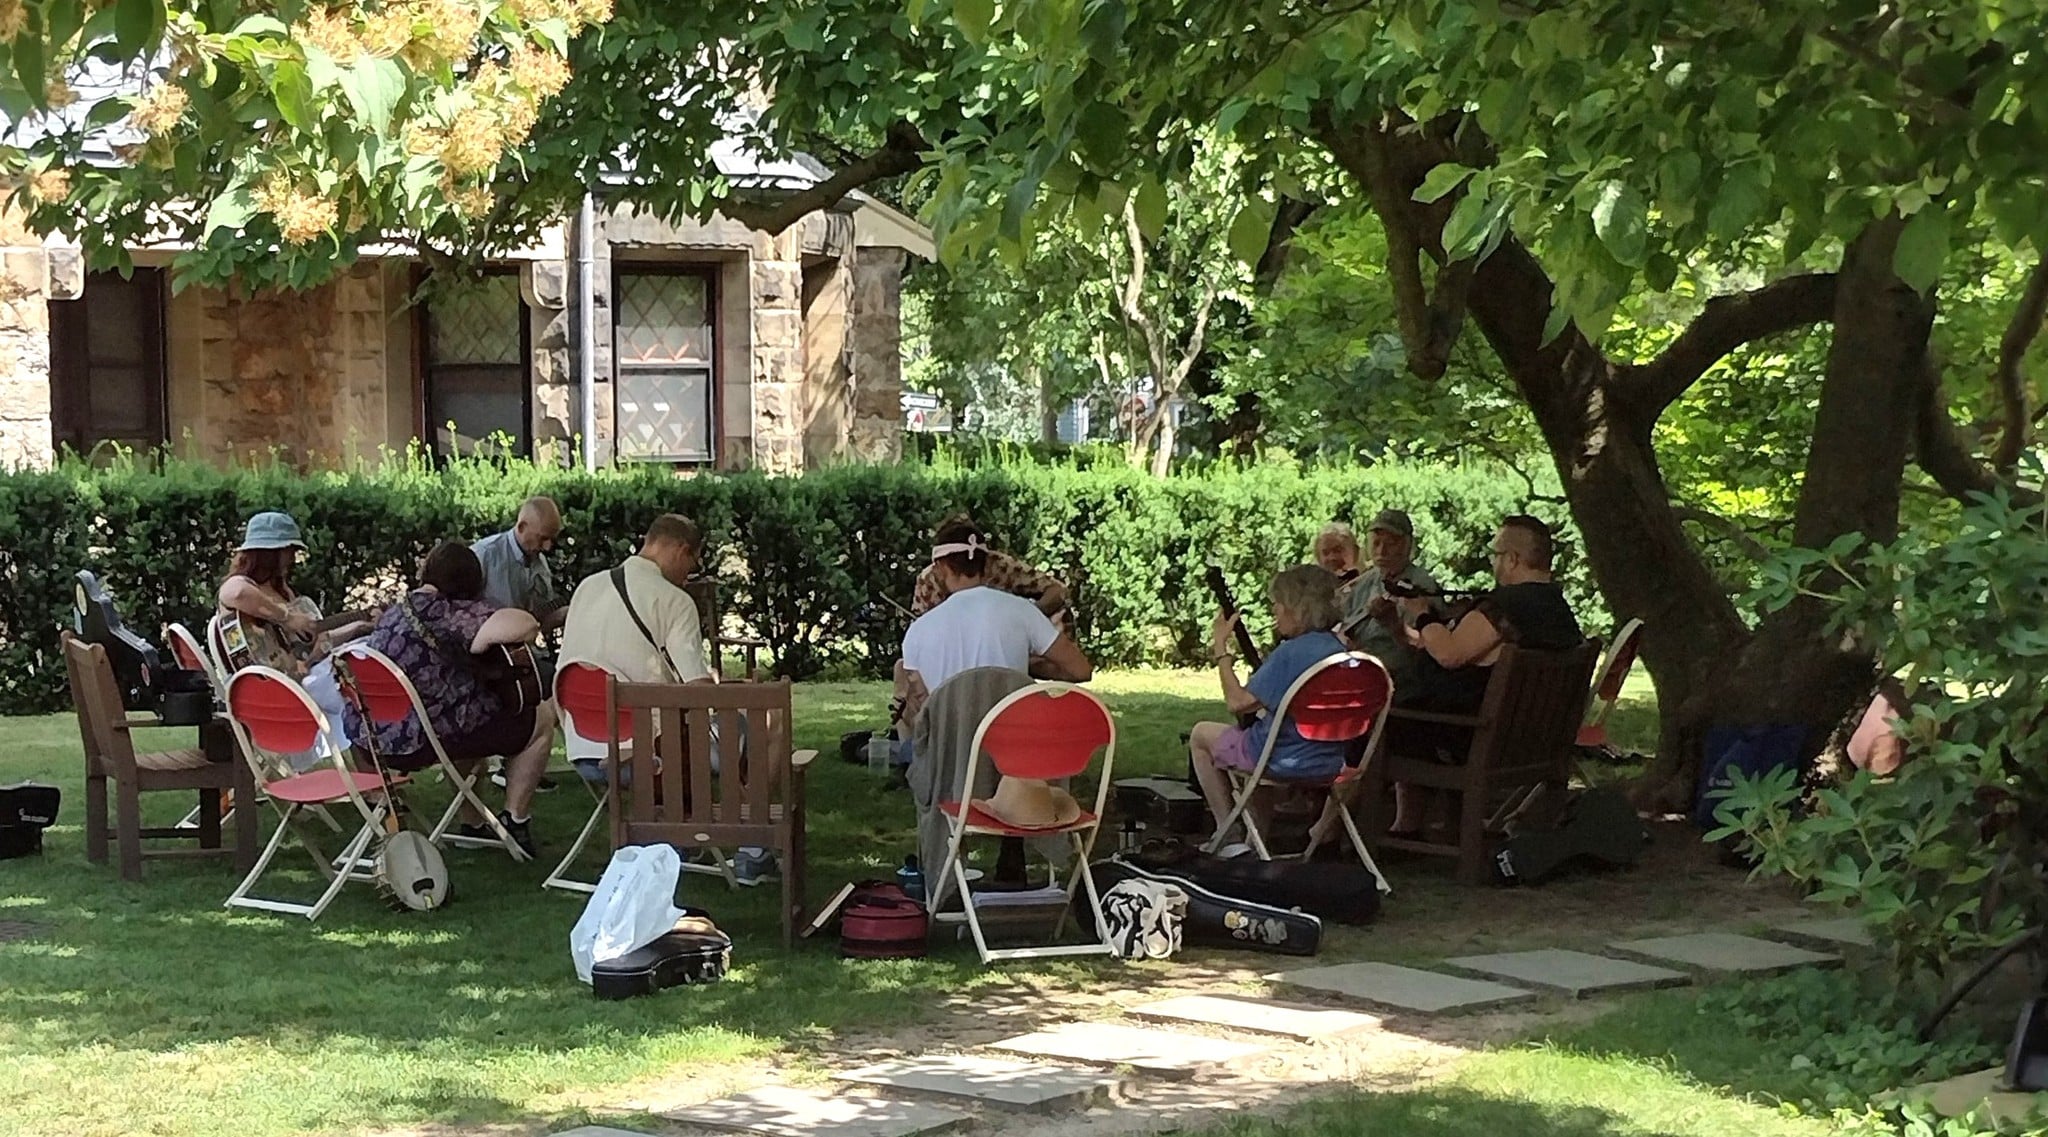 People in a park playing music under shade trees.